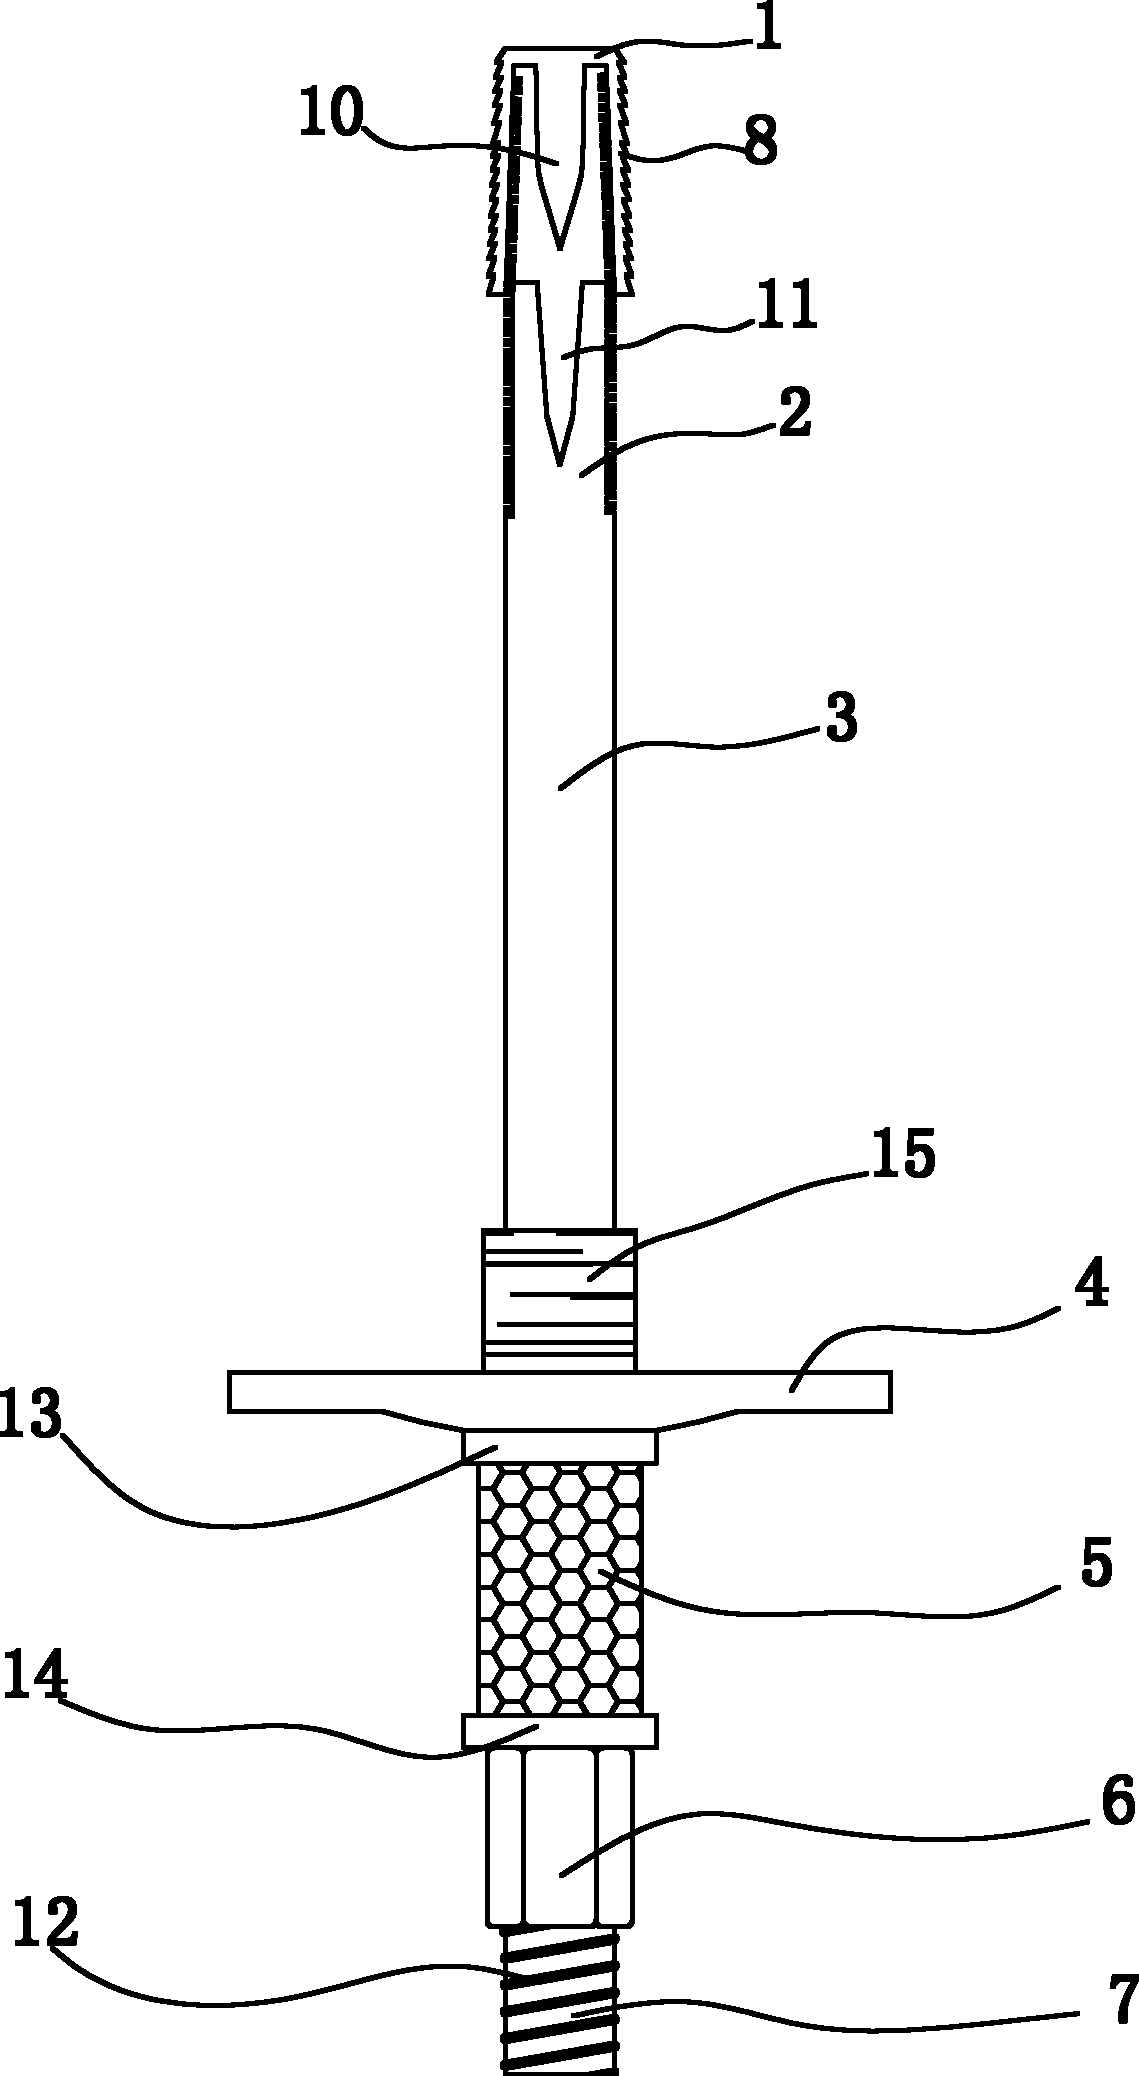 Quickly mounted efficient energy-absorbing mining anchor rod